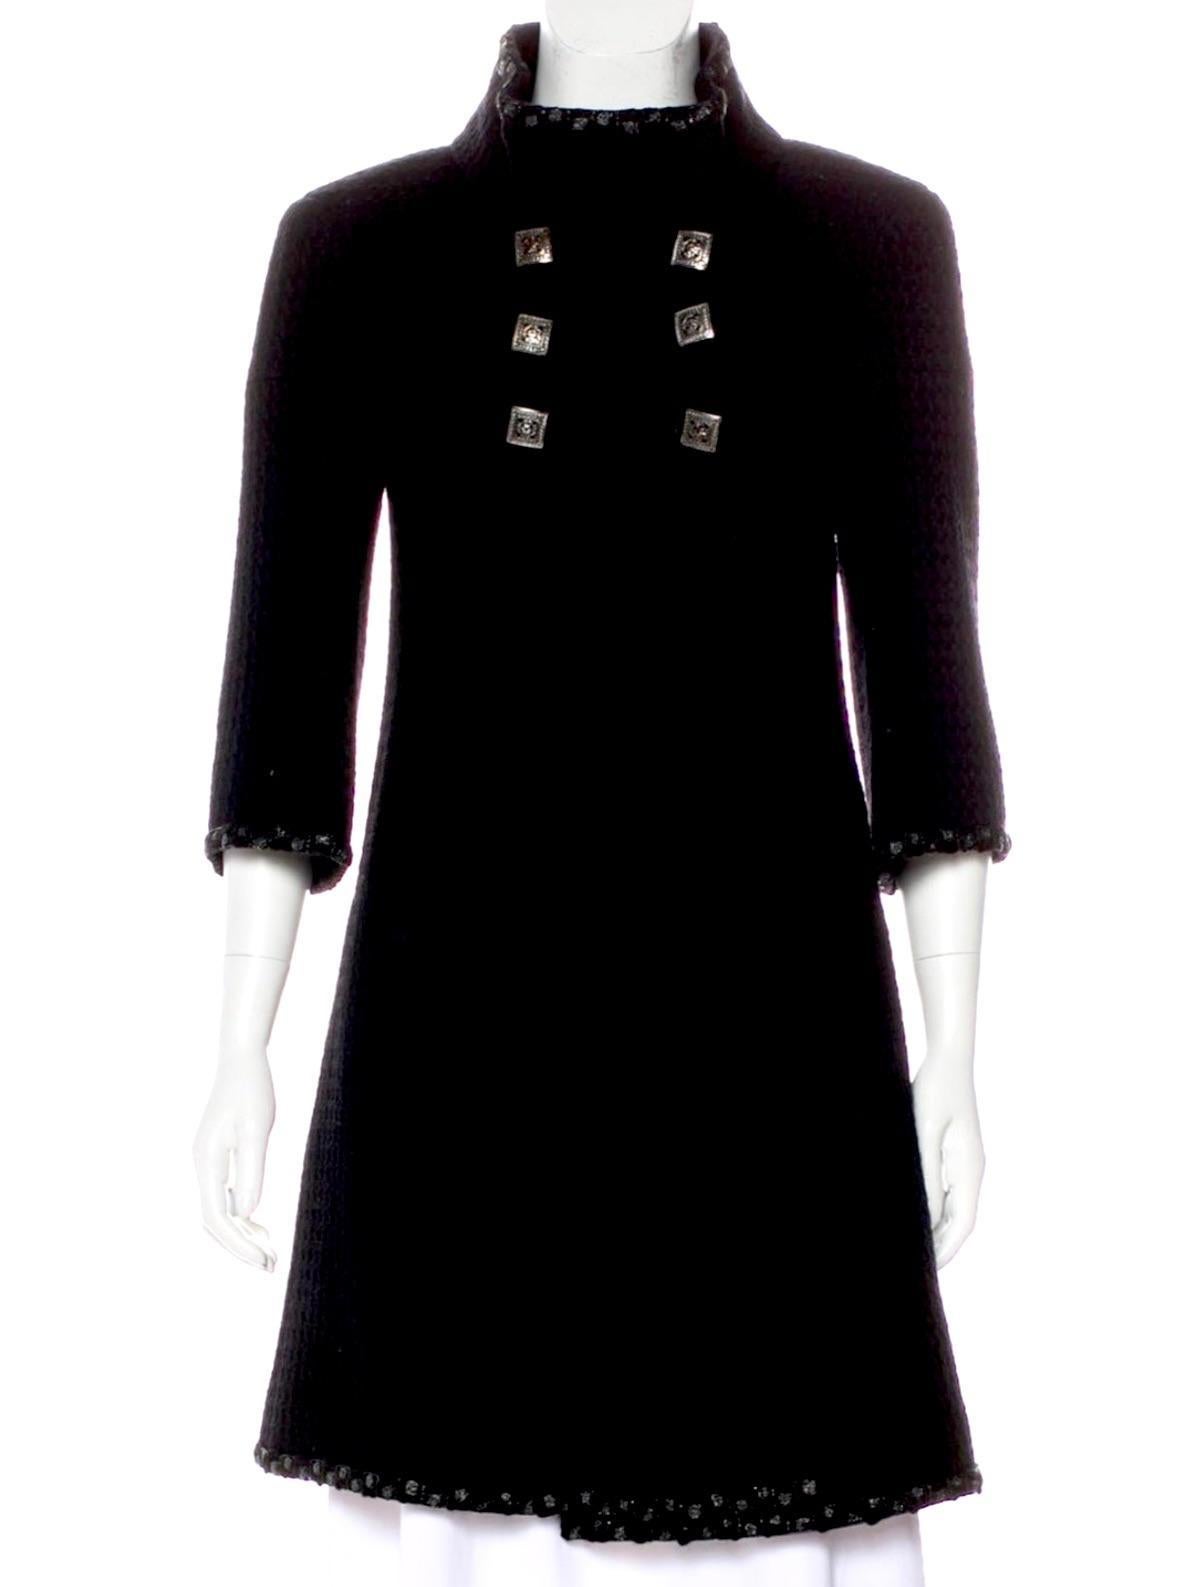 Stunning Chanel black tweed coat from fabulous Paris / BYZANCE Collection by Mr Karl Lagerfeld. 
As seen on Cameron Diaz!
- CC logo jewel Gripoix buttons
- full silk lining
- hand-embroidered woven trim
Size mark 44 FR. Kept unworn, condition is